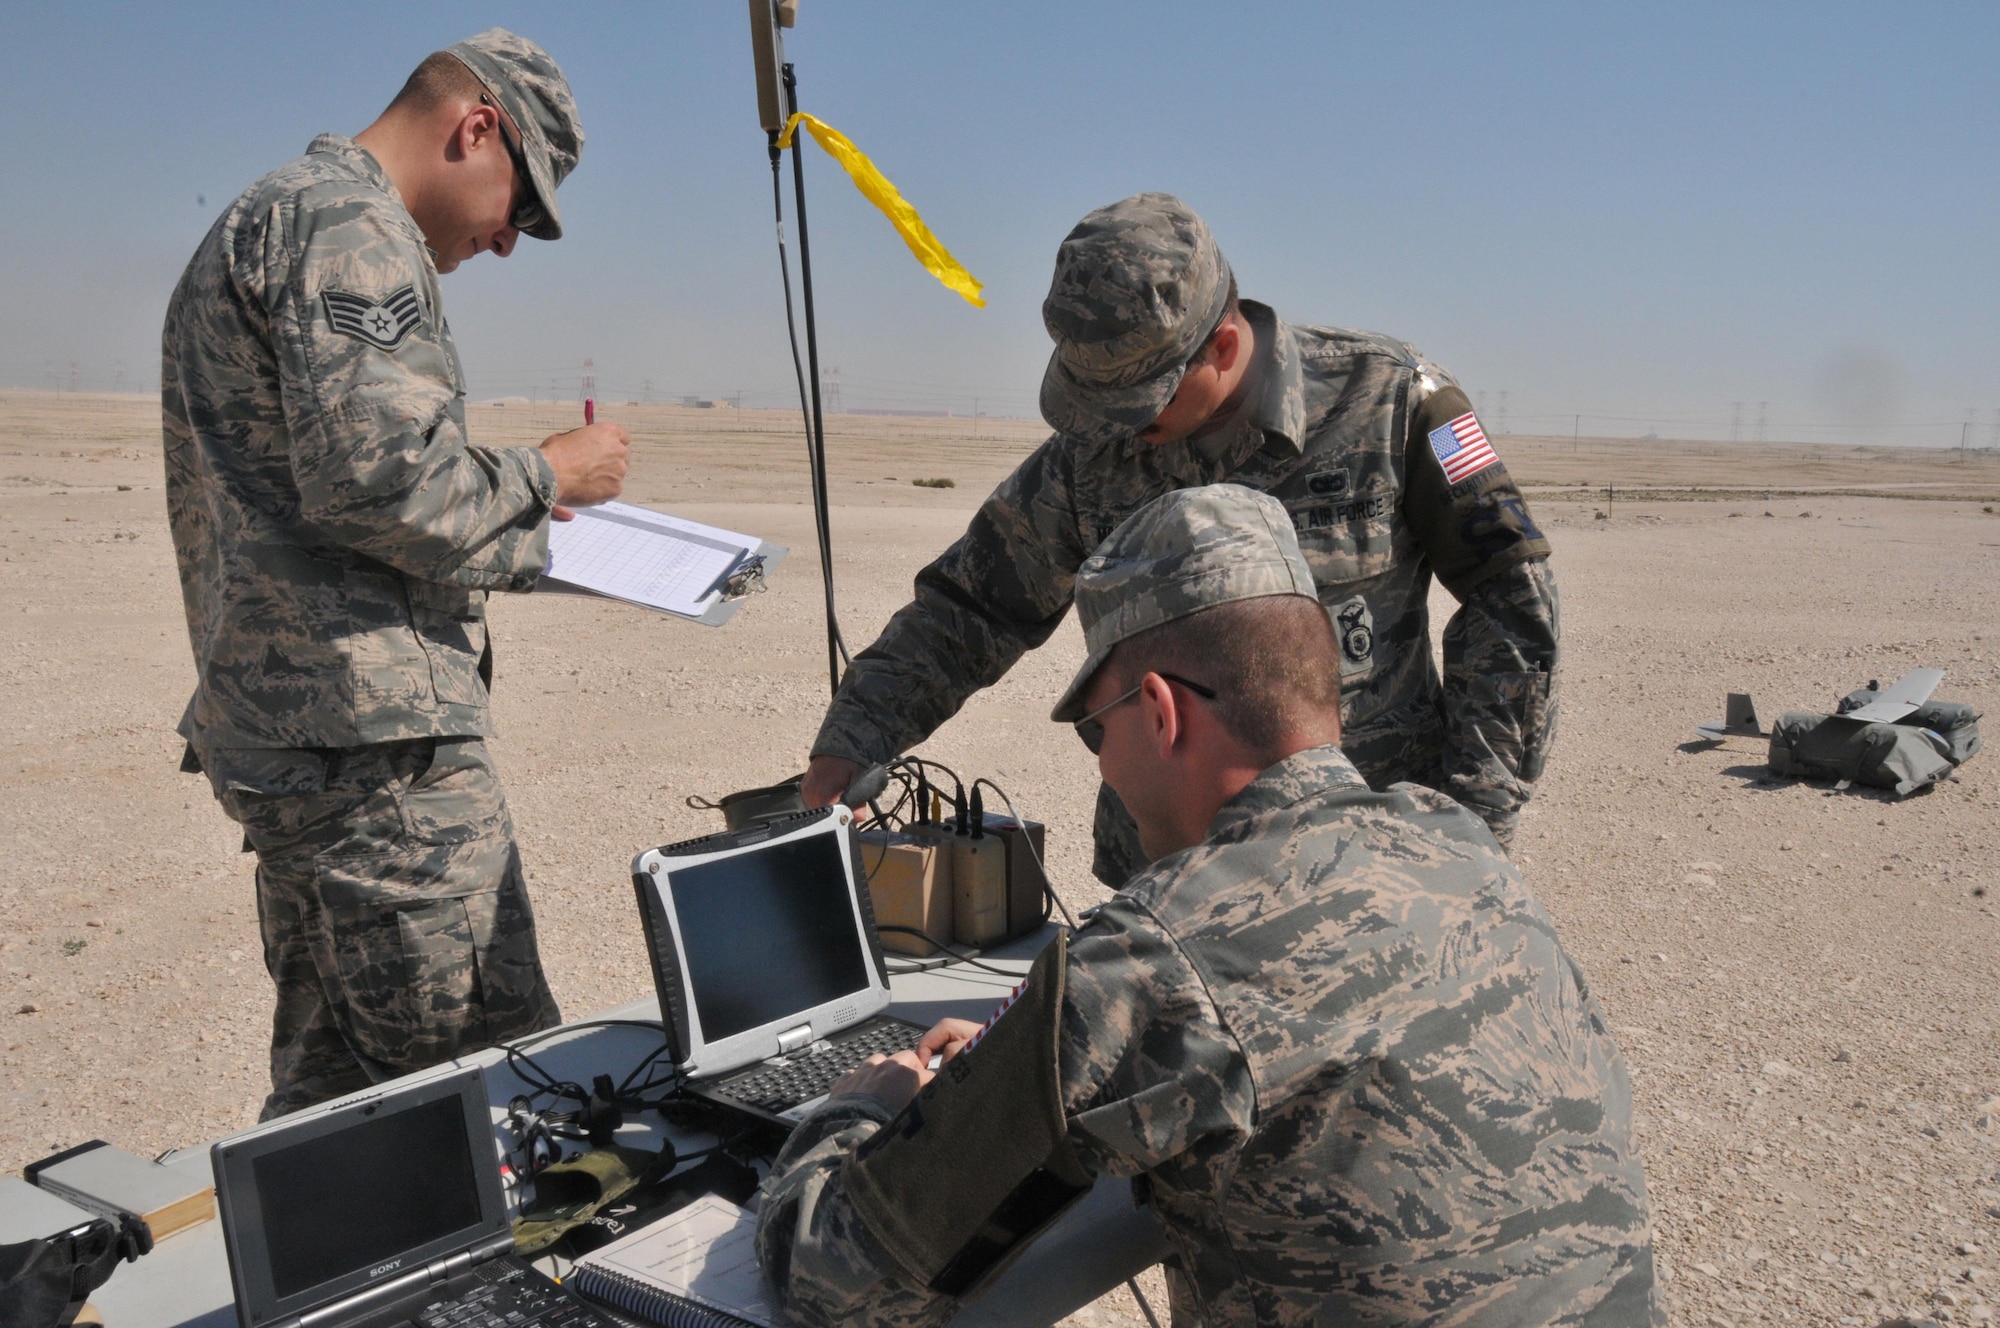 Senior Airman James McGaha (left), Airman 1st Class Chris Dial (middle) and Staff Sgt. Christopher Pfeiffer (right), 379th Expeditionary Security Force Squadron patrolmen, set up for a Raven B Digital Data Link drone, small unmanned aircraft or drone, flight Feb. 19 at Al Udeid Air Base, Qatar. Depending on the weather, the drone can fly between 60-90 minutes in duration. (U.S. Air Force photo by Tech. Sgt. Terrica Y. Jones/Released) 